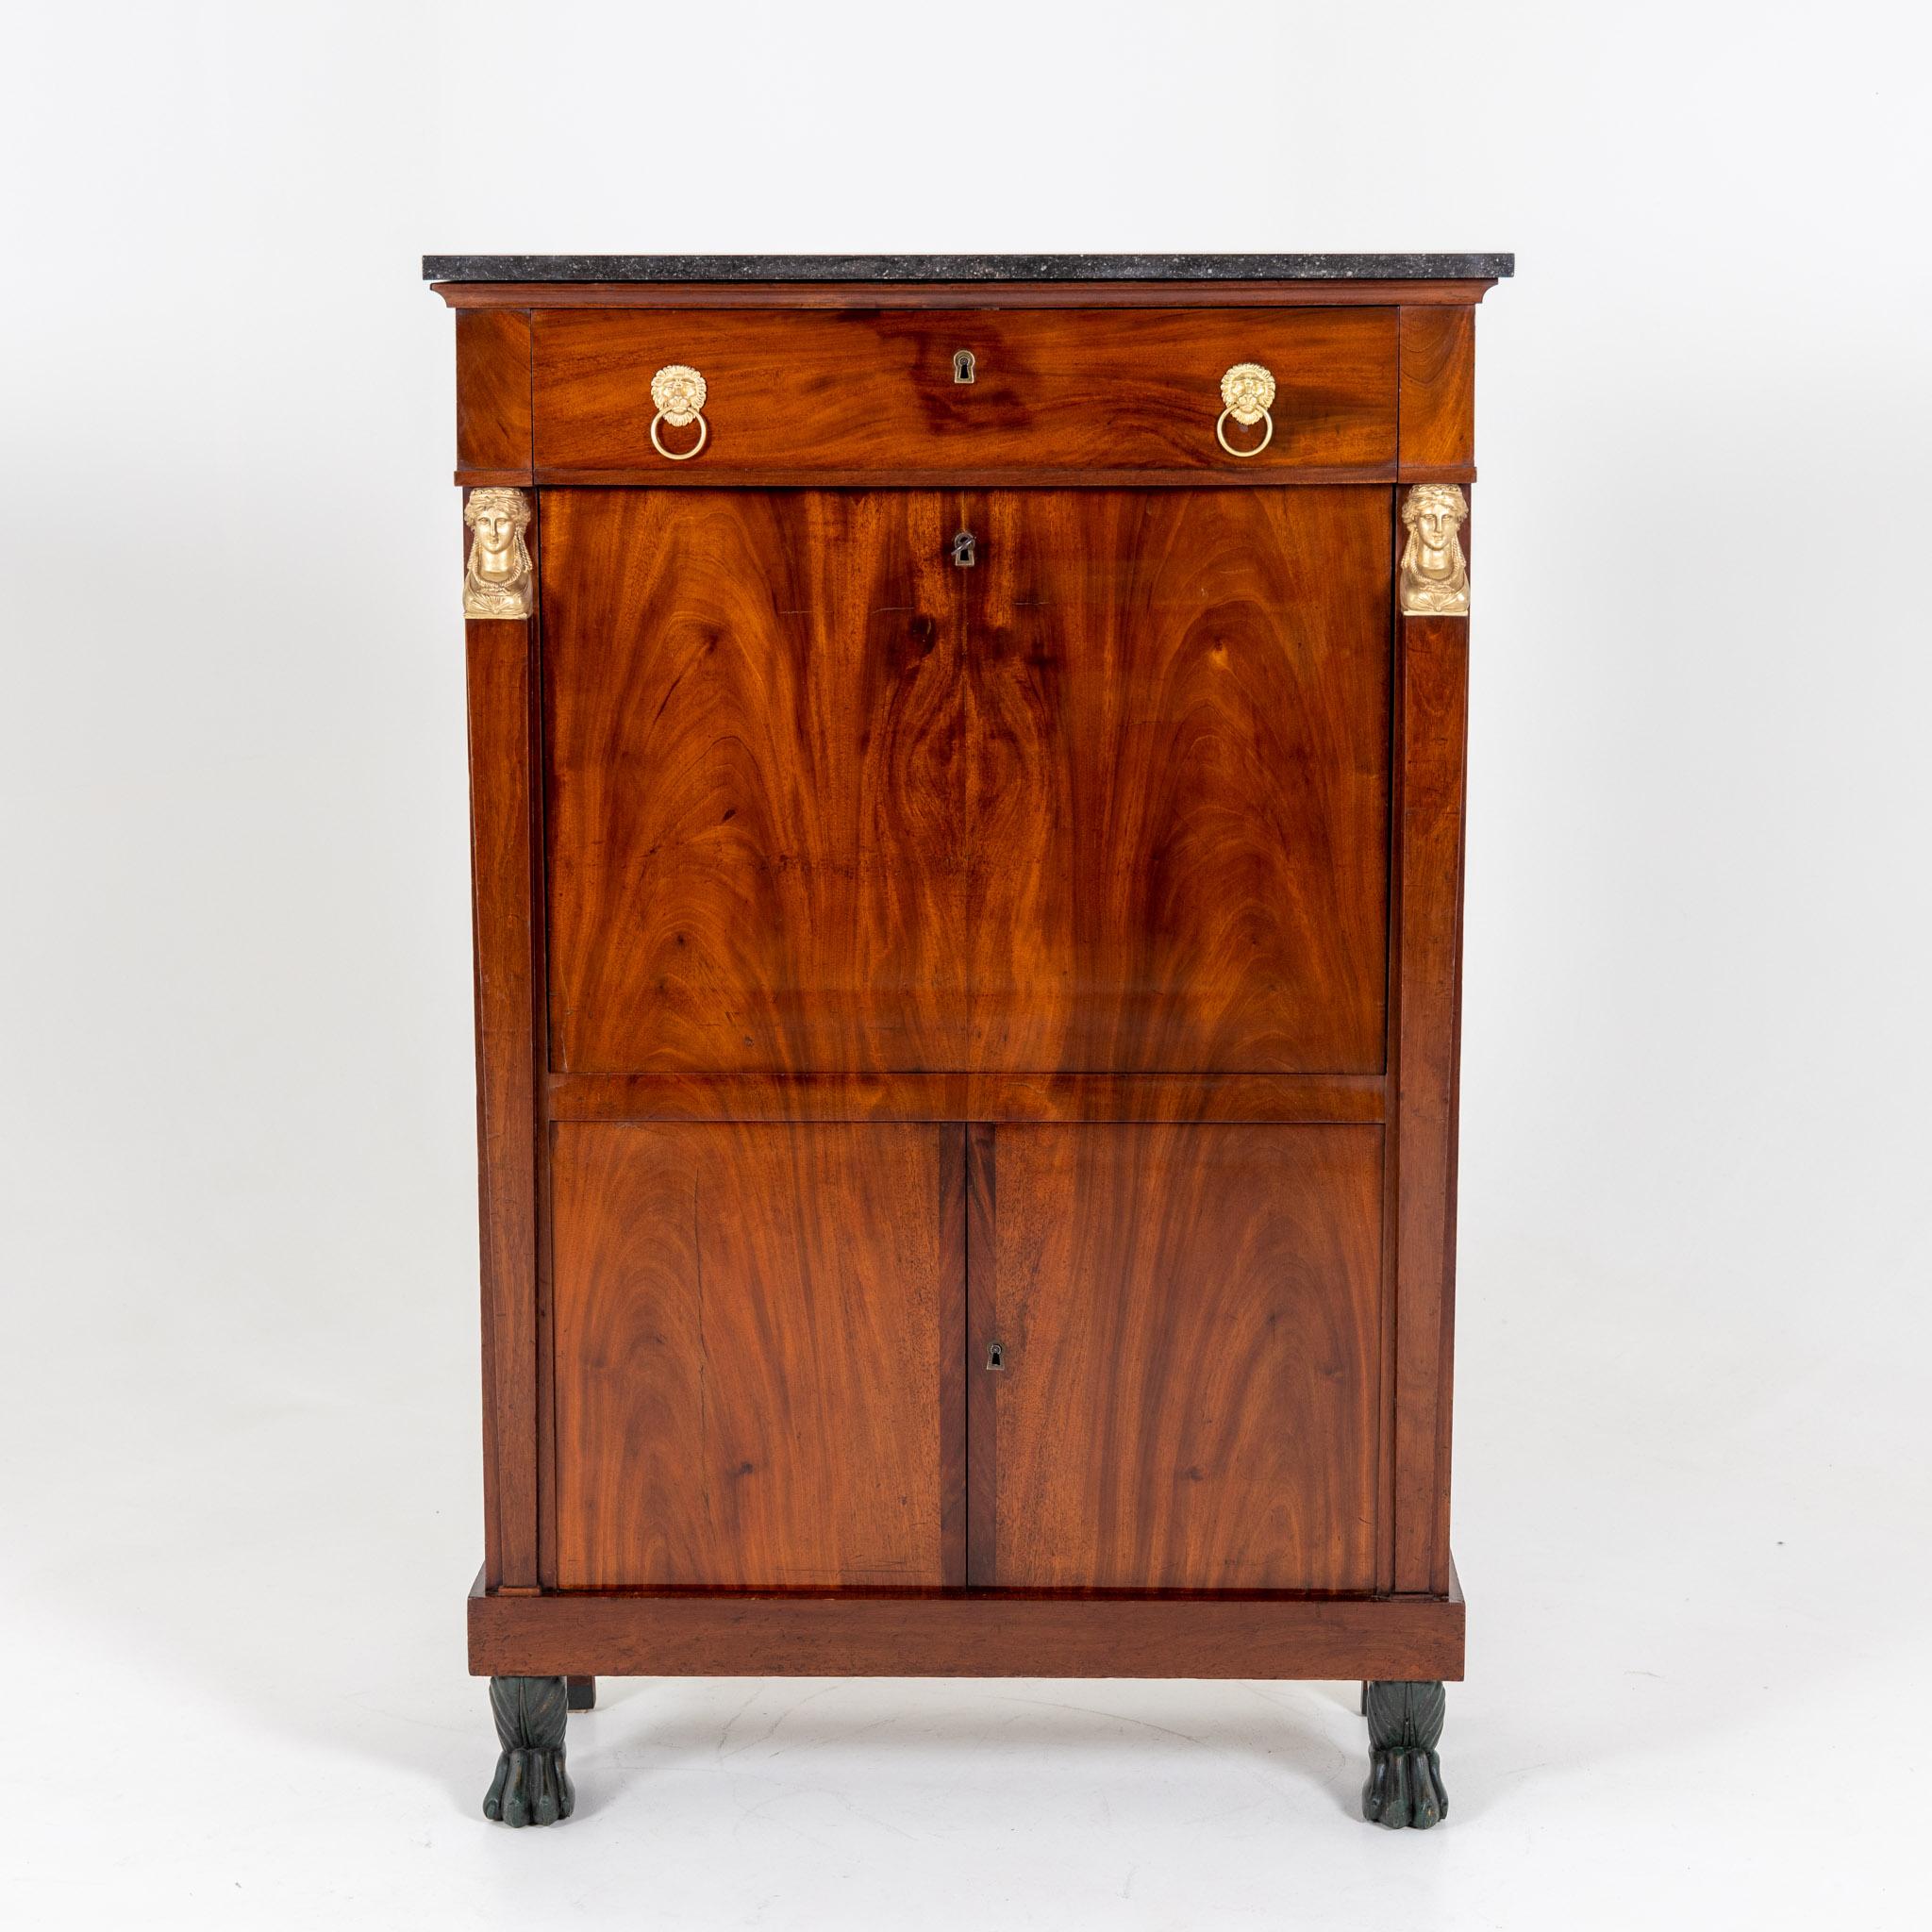 Secretary in mahogany veneer with two-door bottom part as well as dark marble shelf and fire-gilded fittings. Behind the writing flap with brown leather there are more drawers and compartments.